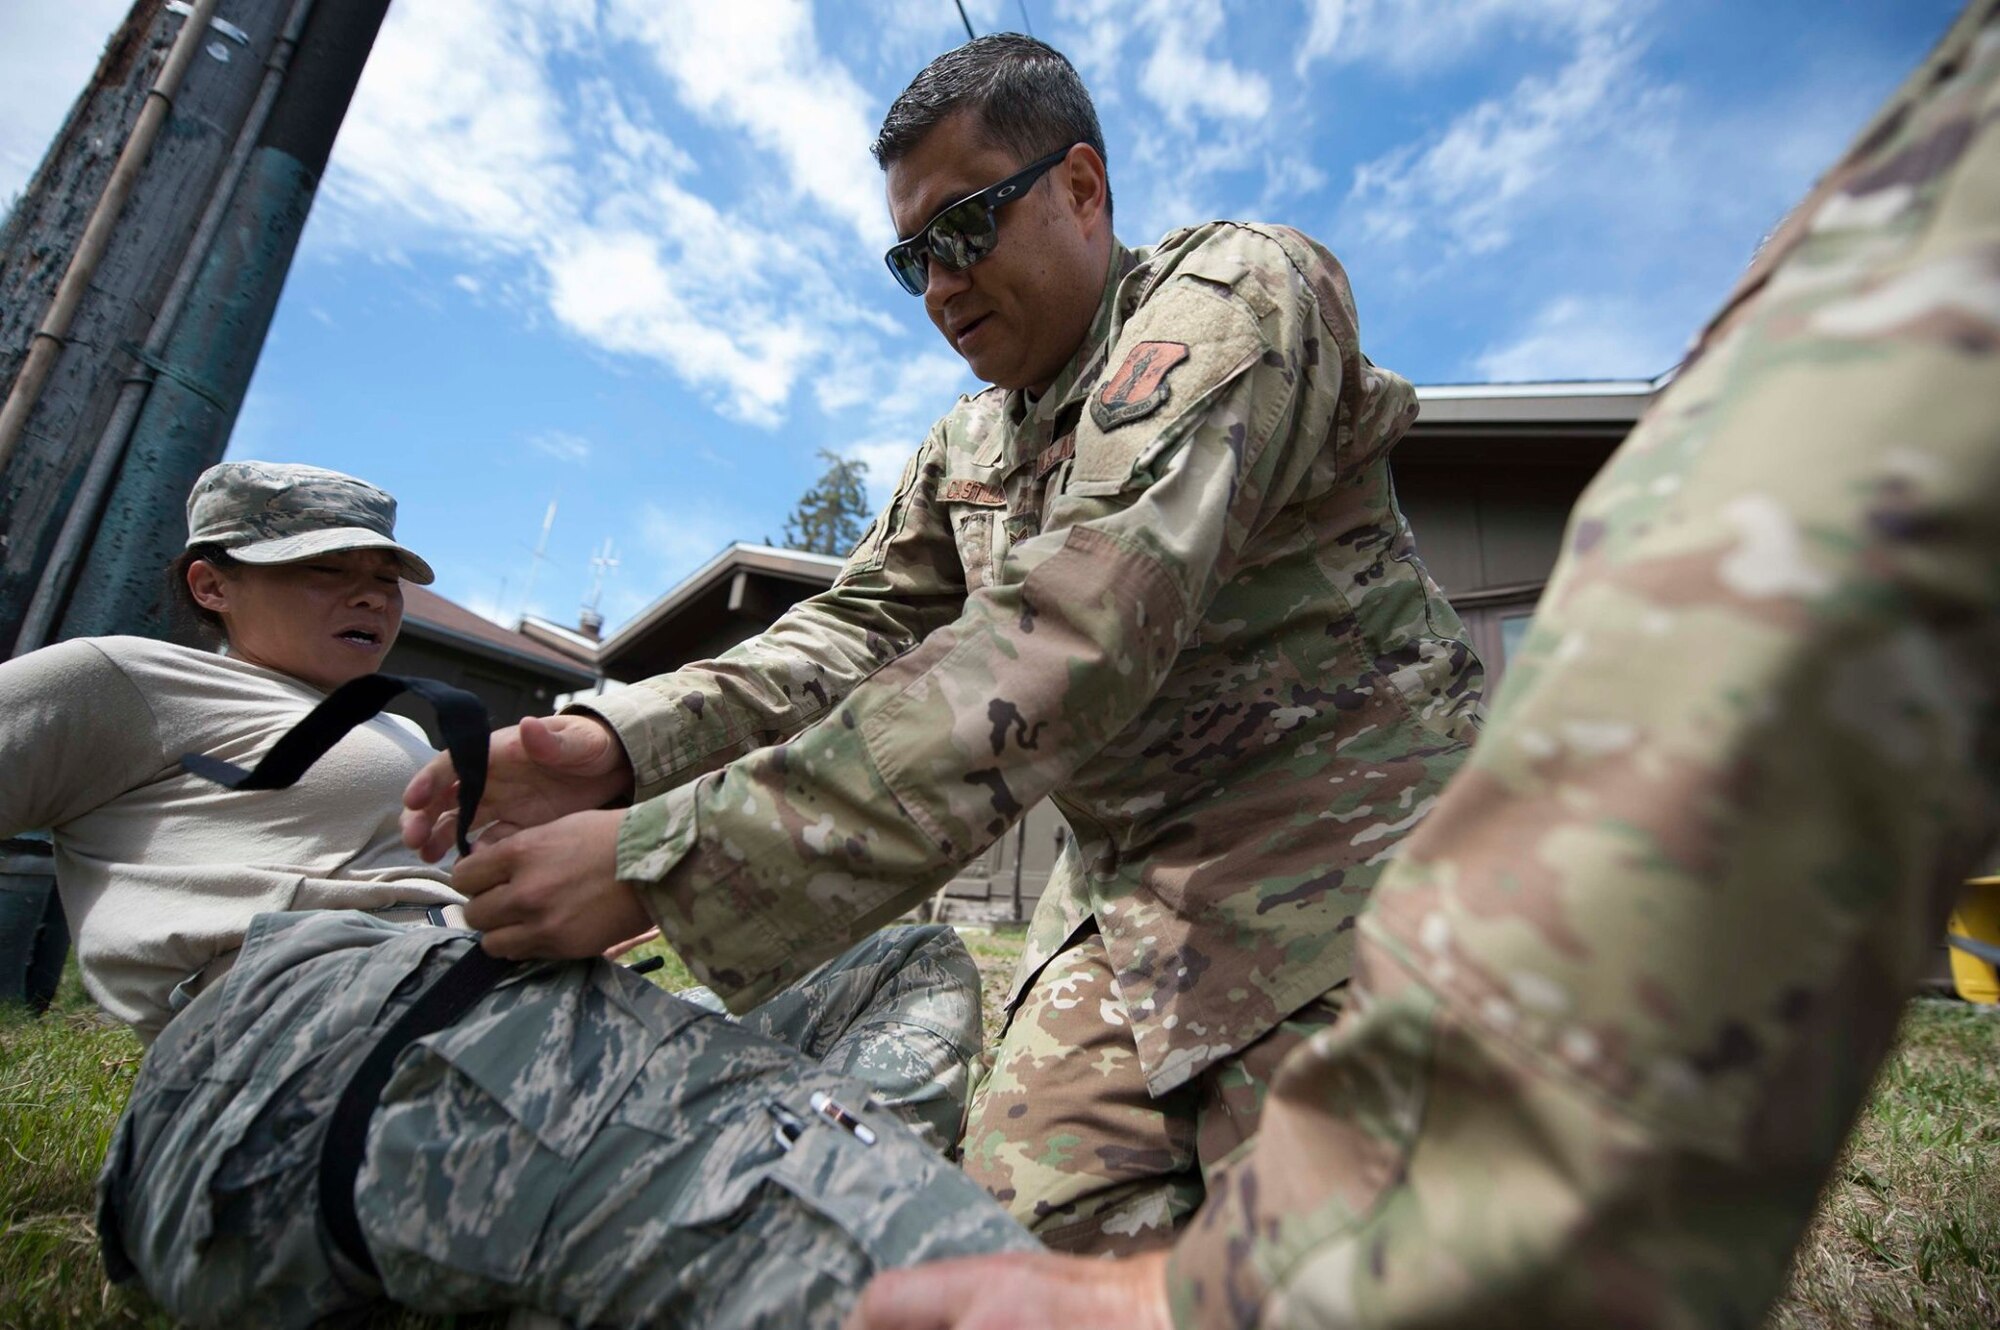 Tech. Sgt. John Castillo applies a tourniquet to Staff Sgt. Kimberly Gaona, both Serch and extraction medics assigned to 149th Medical Group, during Tactical Combat Casualty Care training at Coast Guard Station Lake Tahoe, Nevada, June 16.